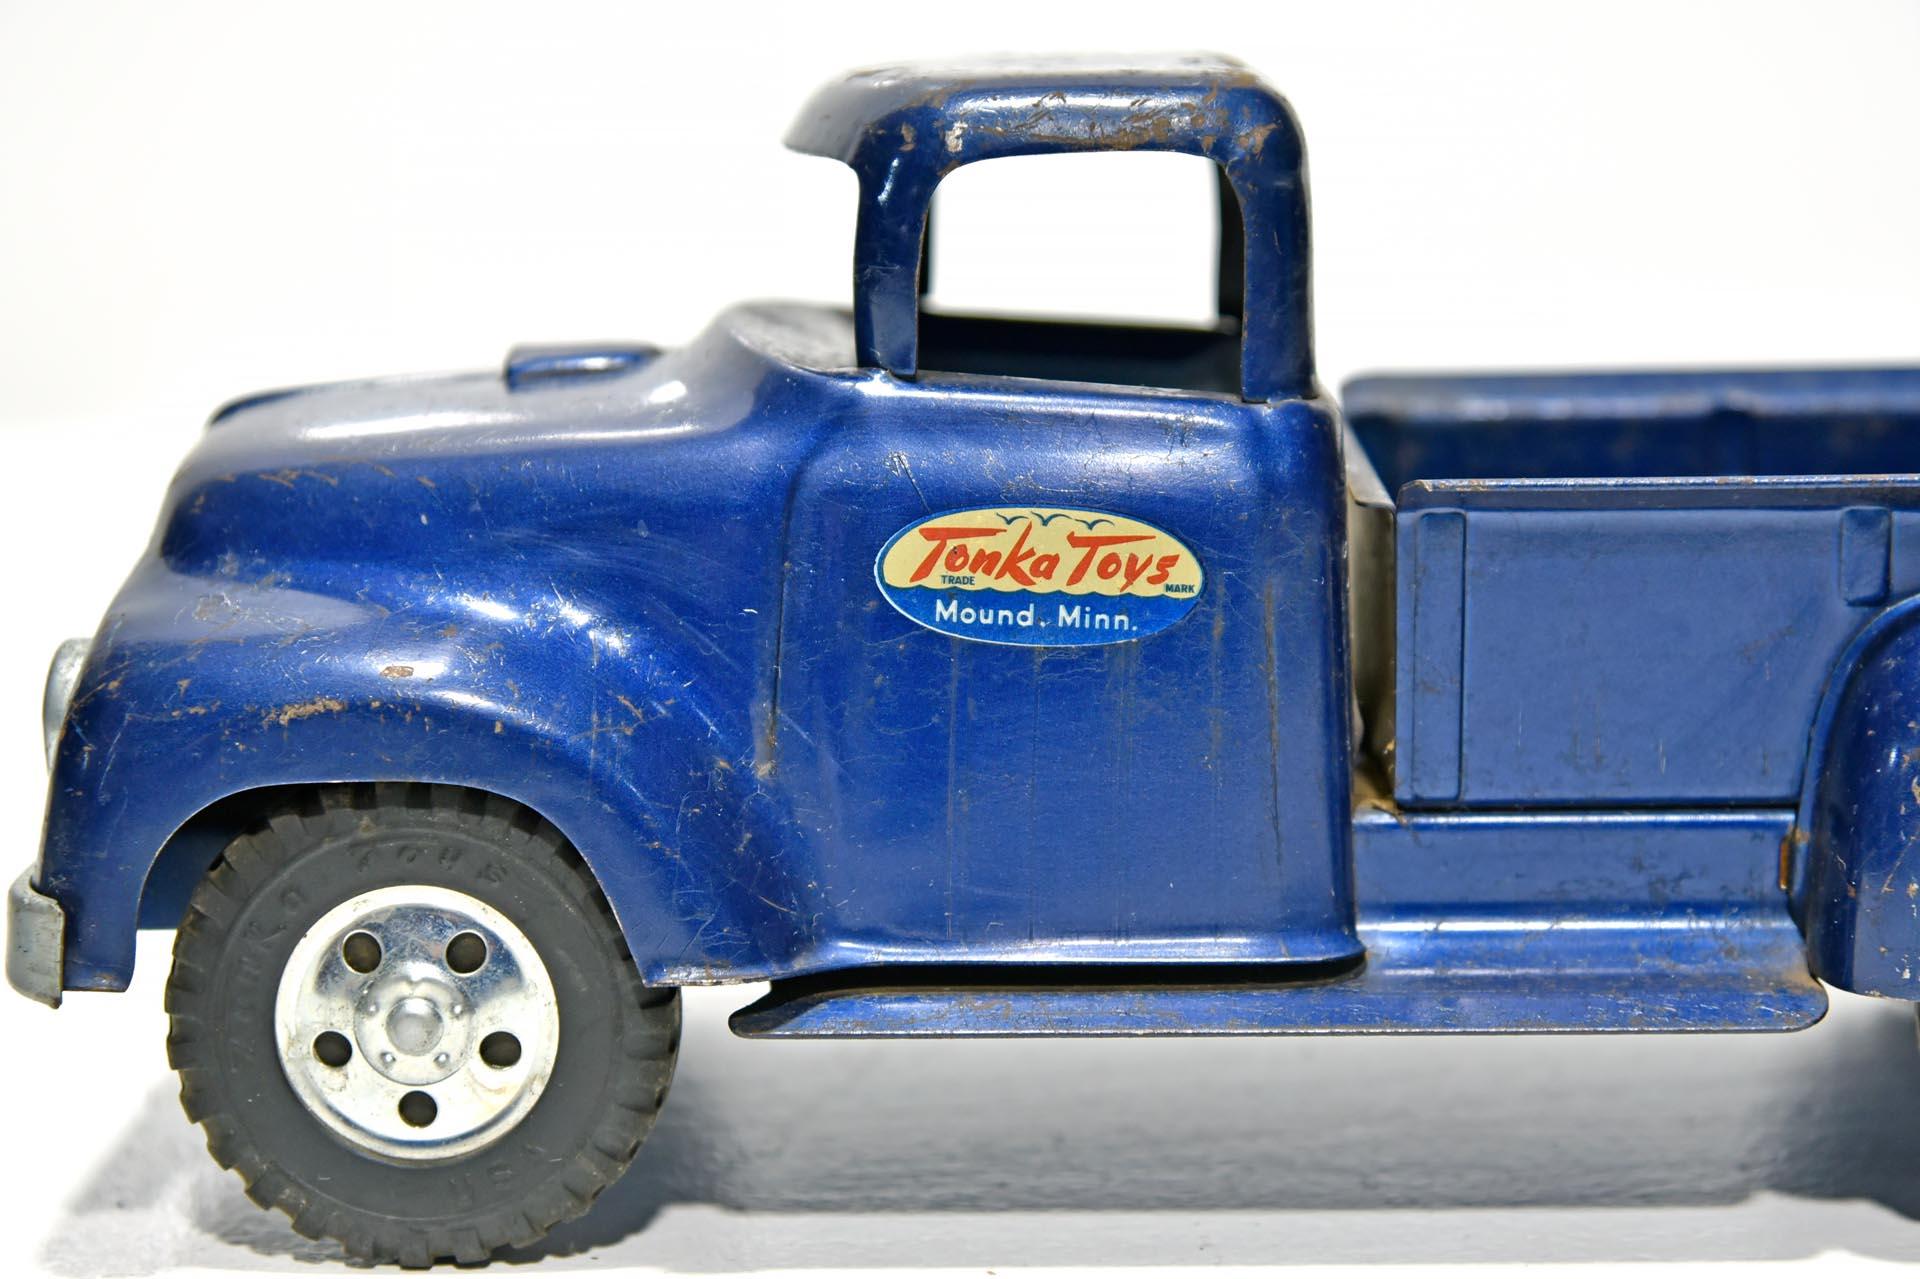 Lot of 2 Tonkas: 1956 Tonka Farms Stake Bed Toy Truck & 1957 Tonka Step Side Pickup Truck